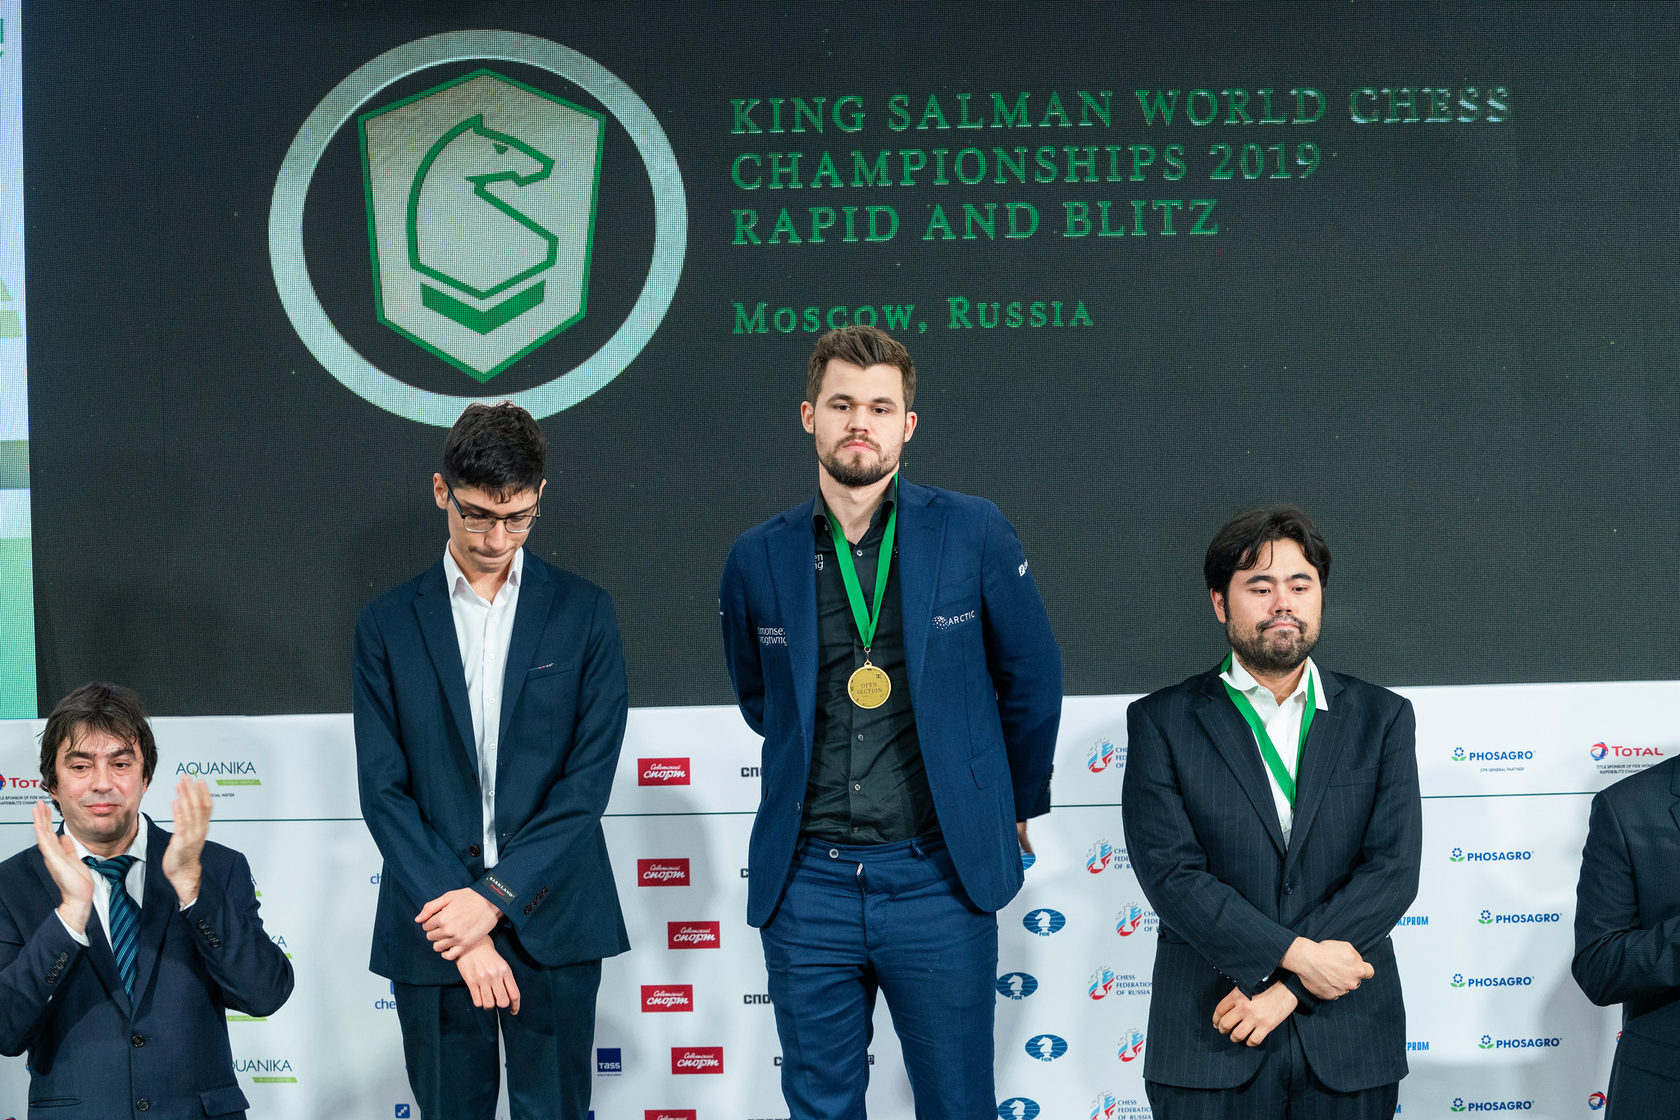 World Rapid and Blitz Champions Awarded in Moscow